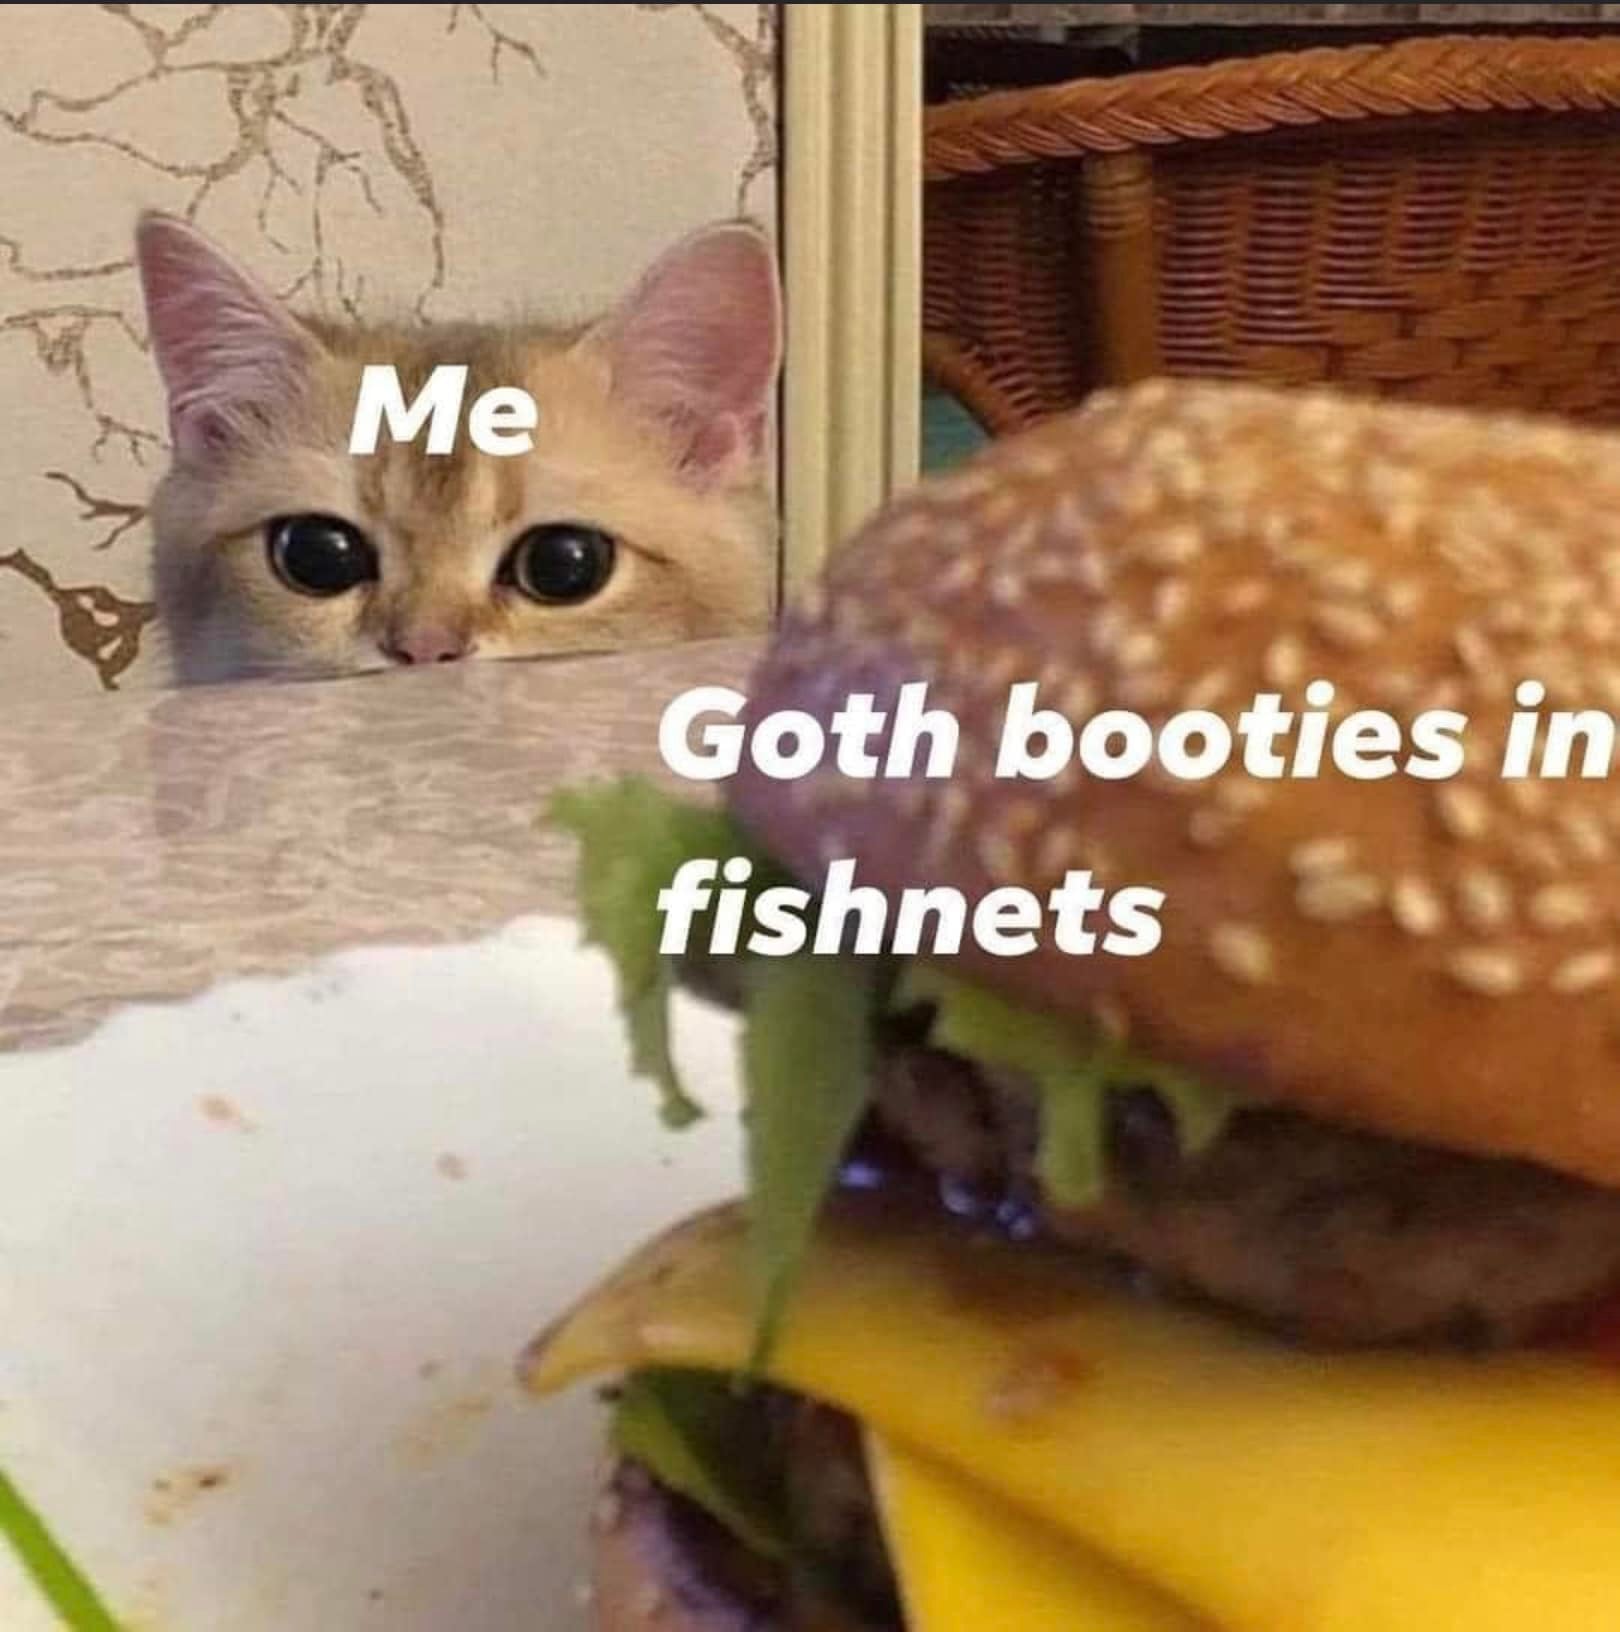 adult themed memes - cat staring at burger - L Me Goth booties in fishnets